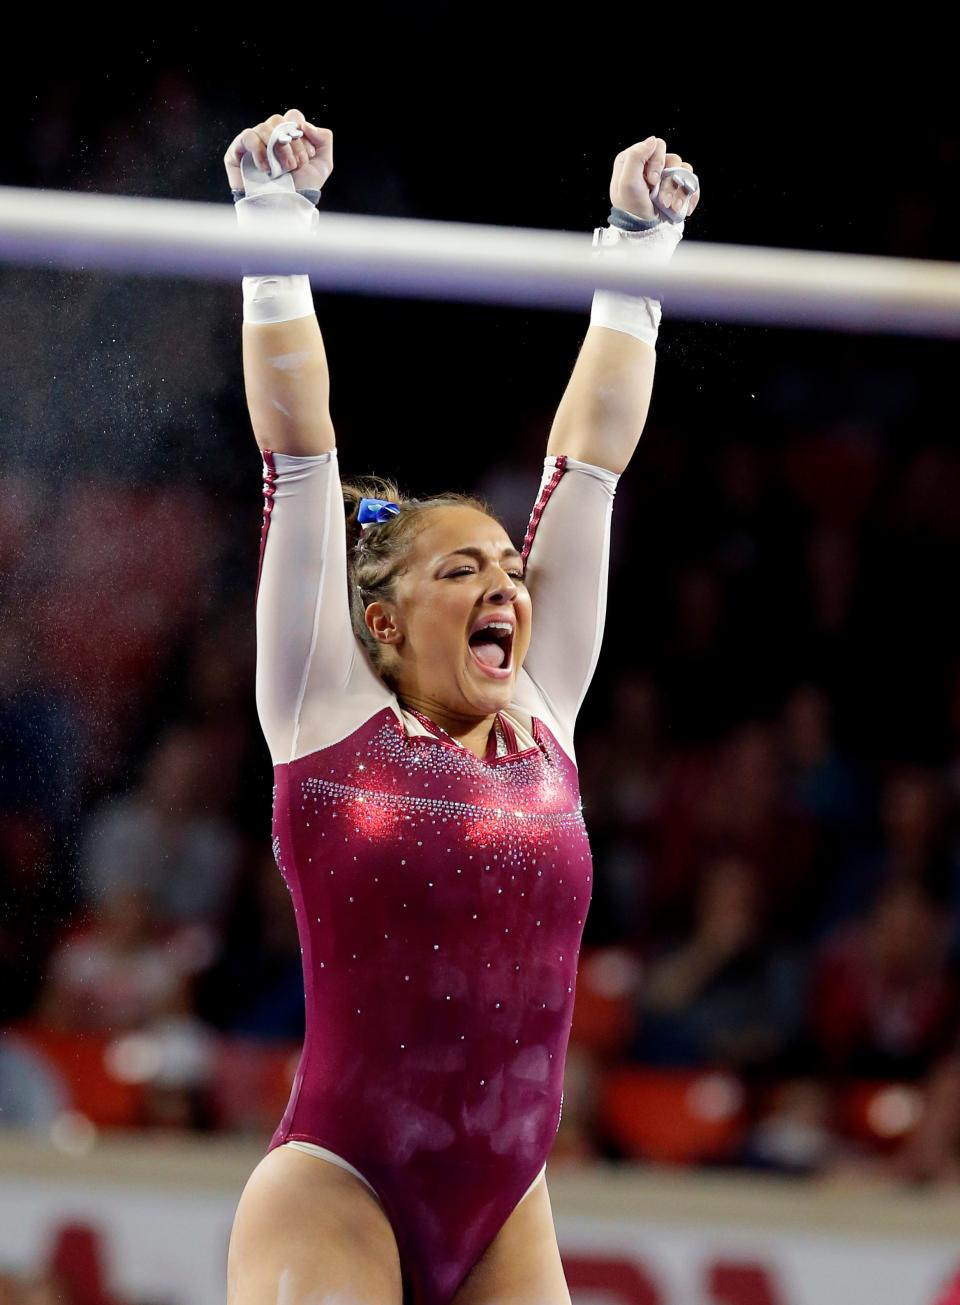 OU's Maggie Nichols was a two-time NCAA gymnastics champion in the all-around.